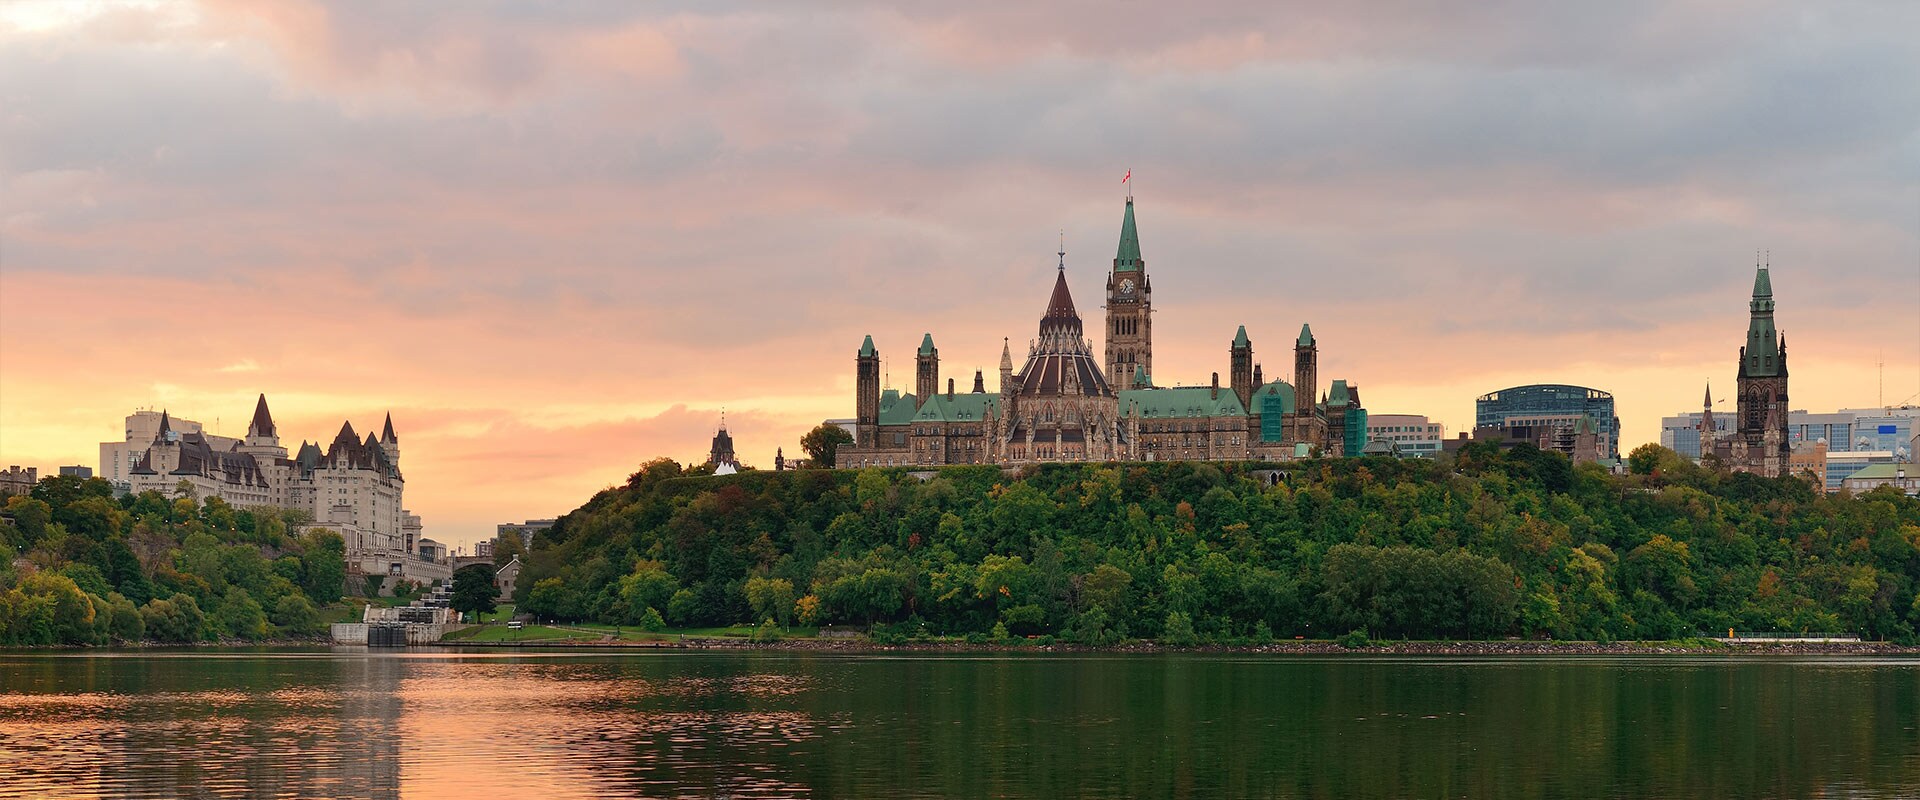 Parliament Hill in the morning, Ottawa, Canada